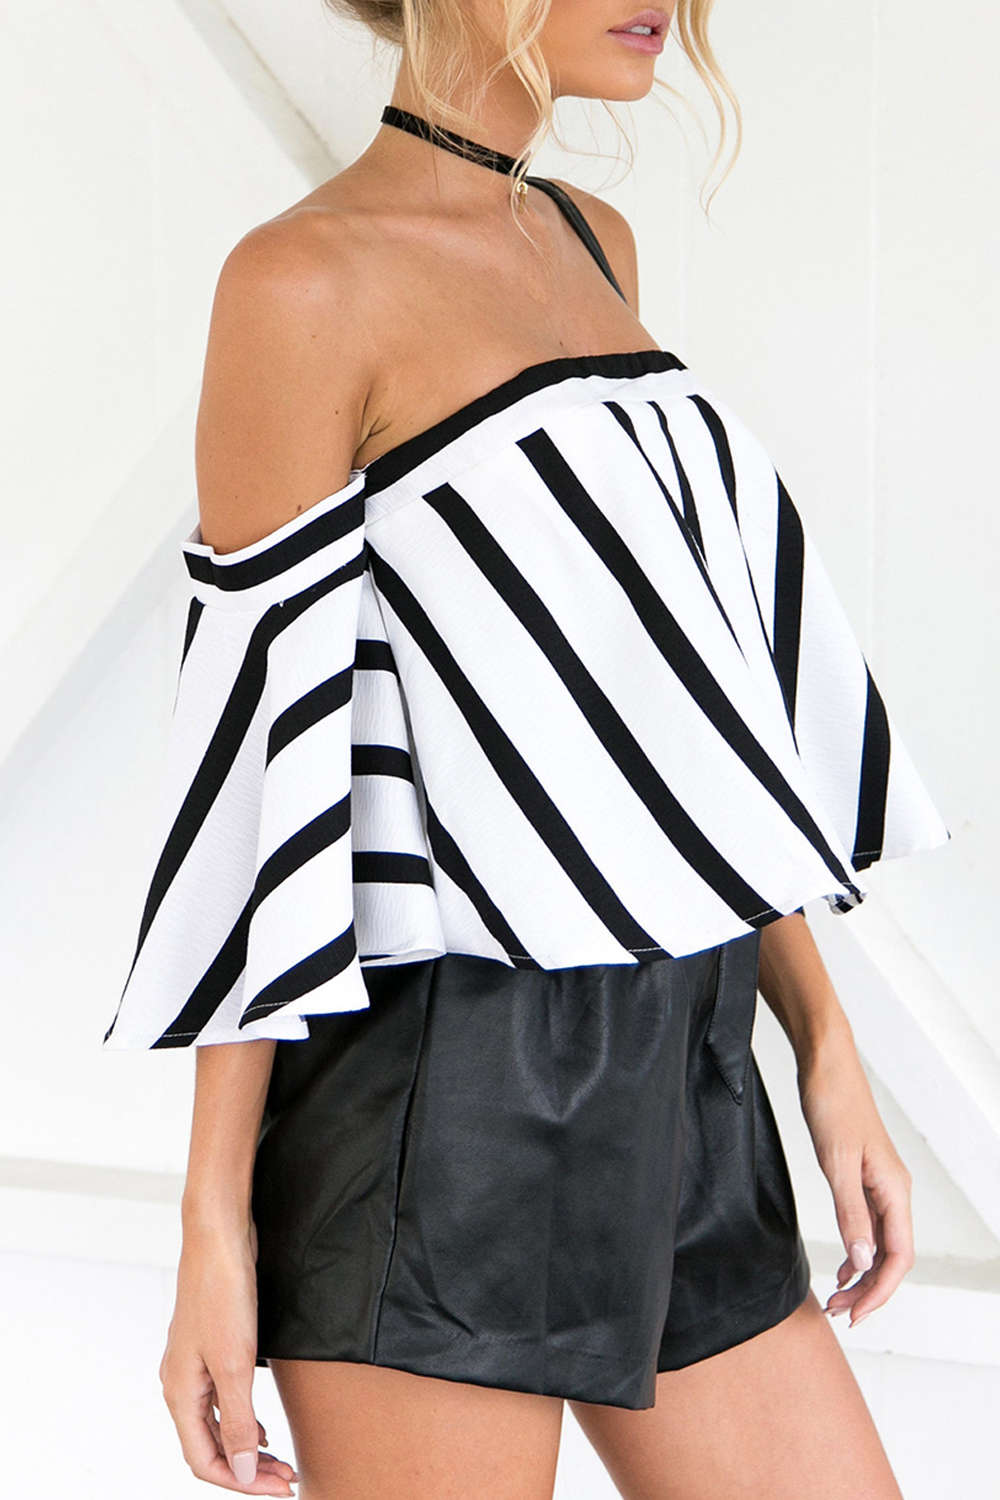 Iyasson Striped Off-the-shoulder Silhouette Top